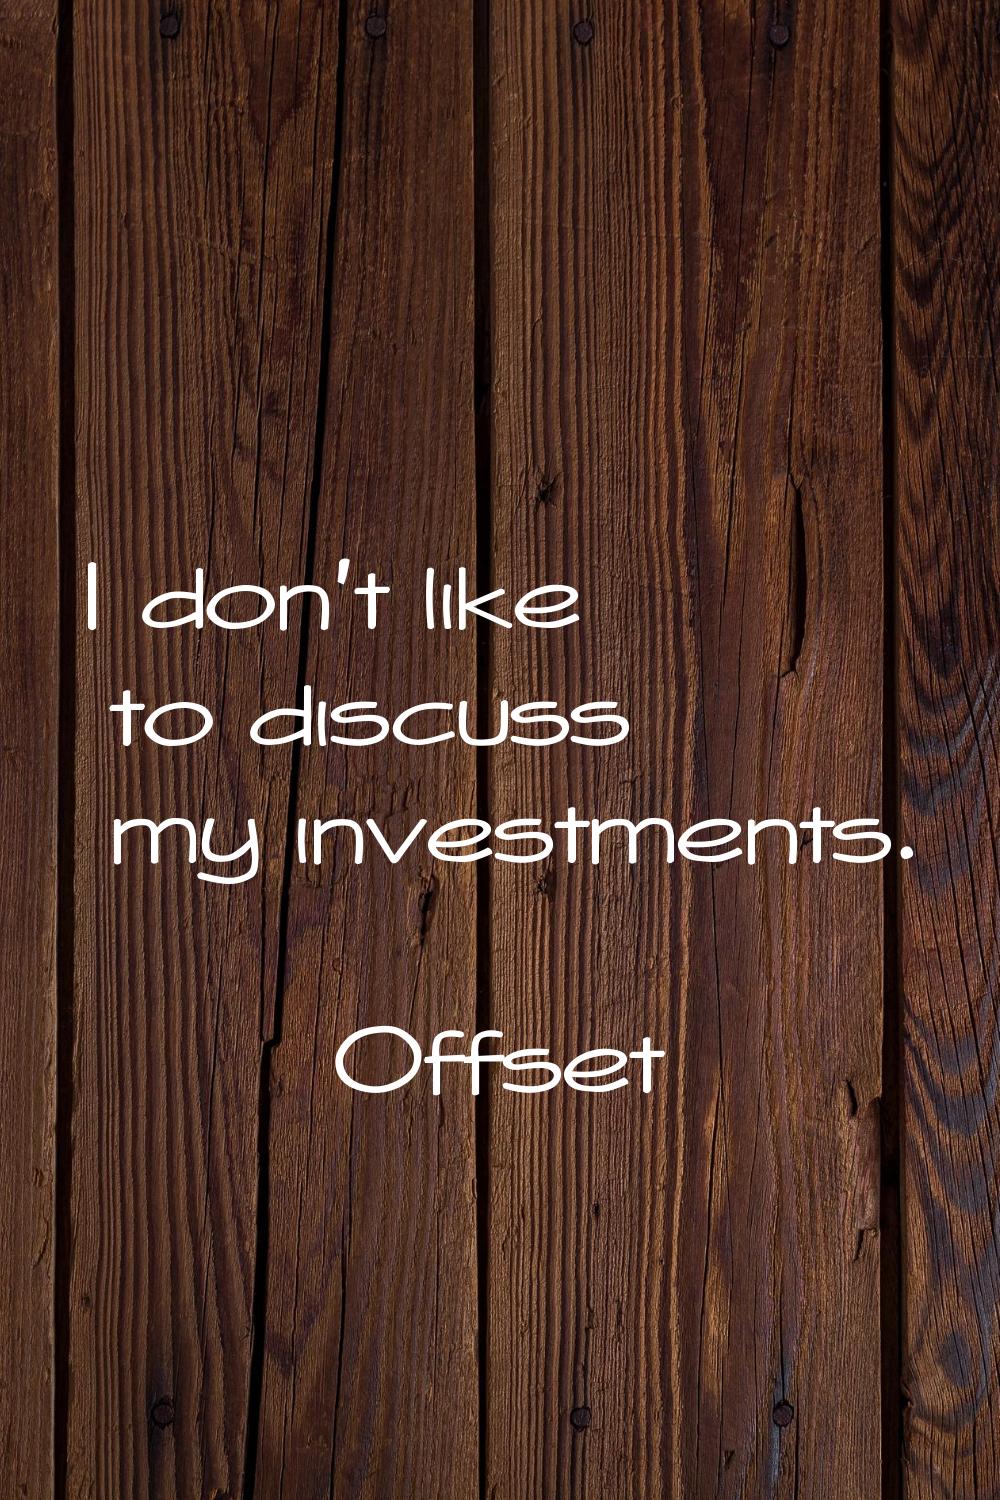 I don't like to discuss my investments.